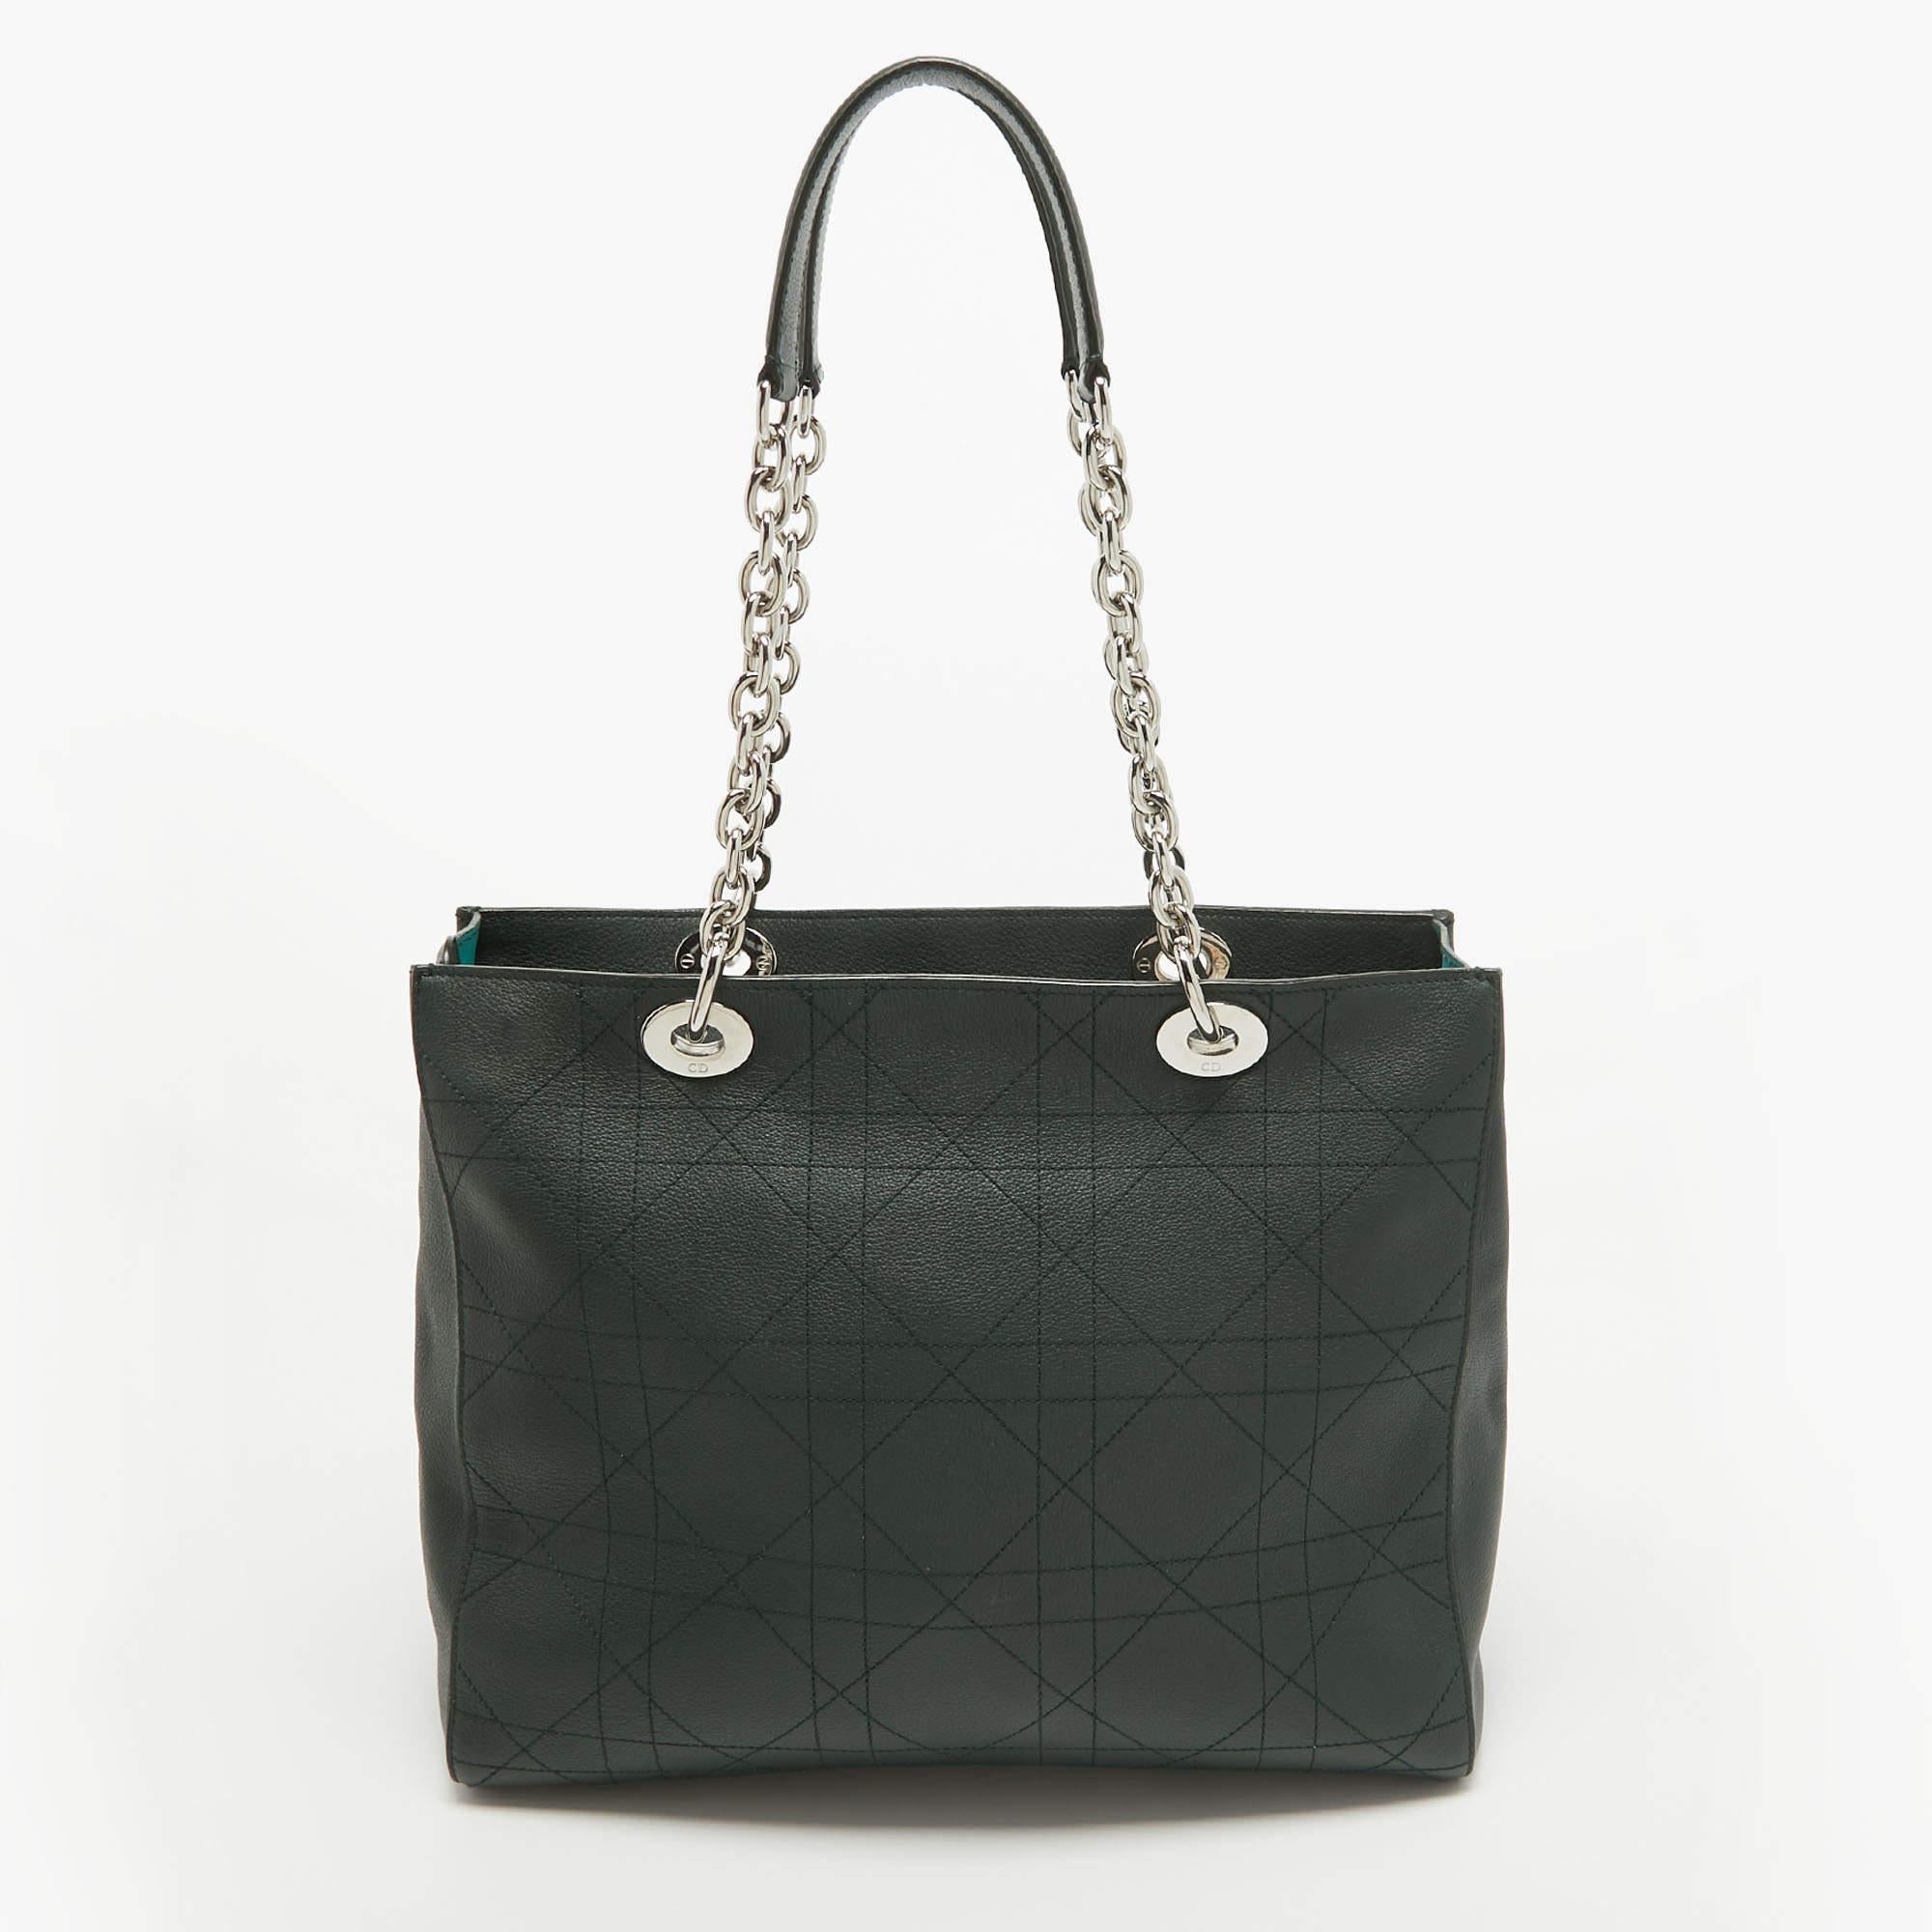 Dior Dark Green Cannage Leather Large Ultradior Tote 2